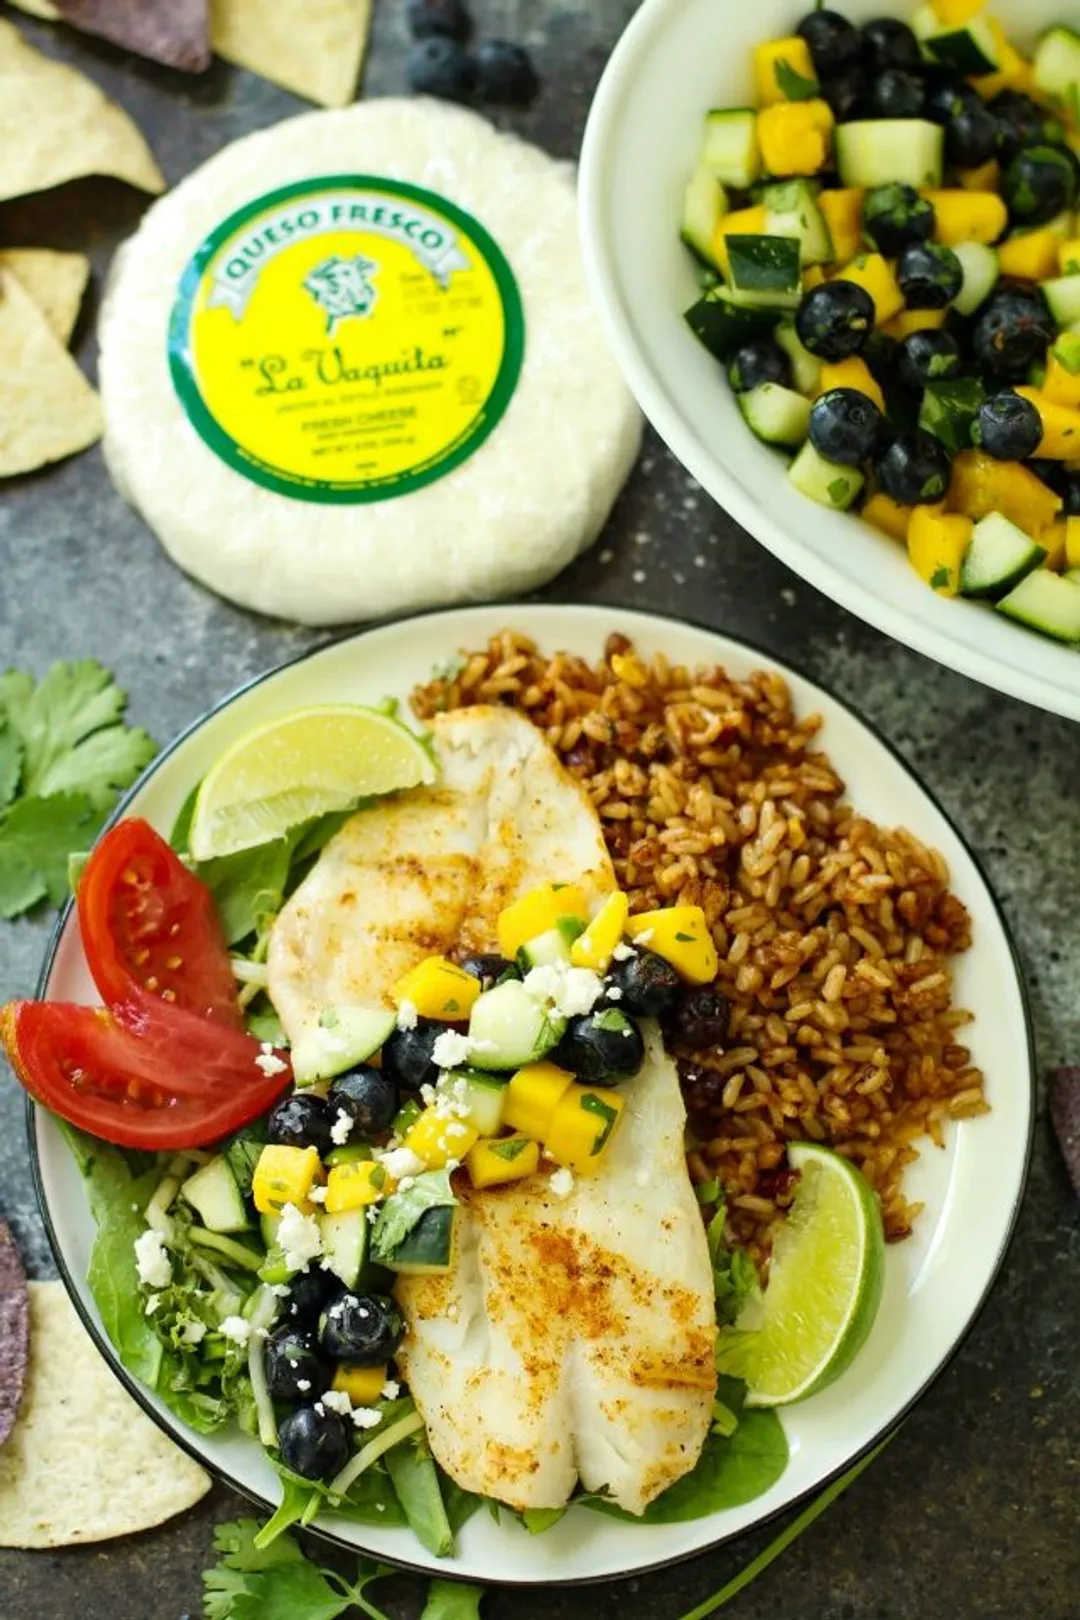 A plate of brown rice, cooked orange roughy, cilantro, lime wedges, tomato wedges, corn, and black beans laid near a block of La Vaquita Queso Fresco Cheese